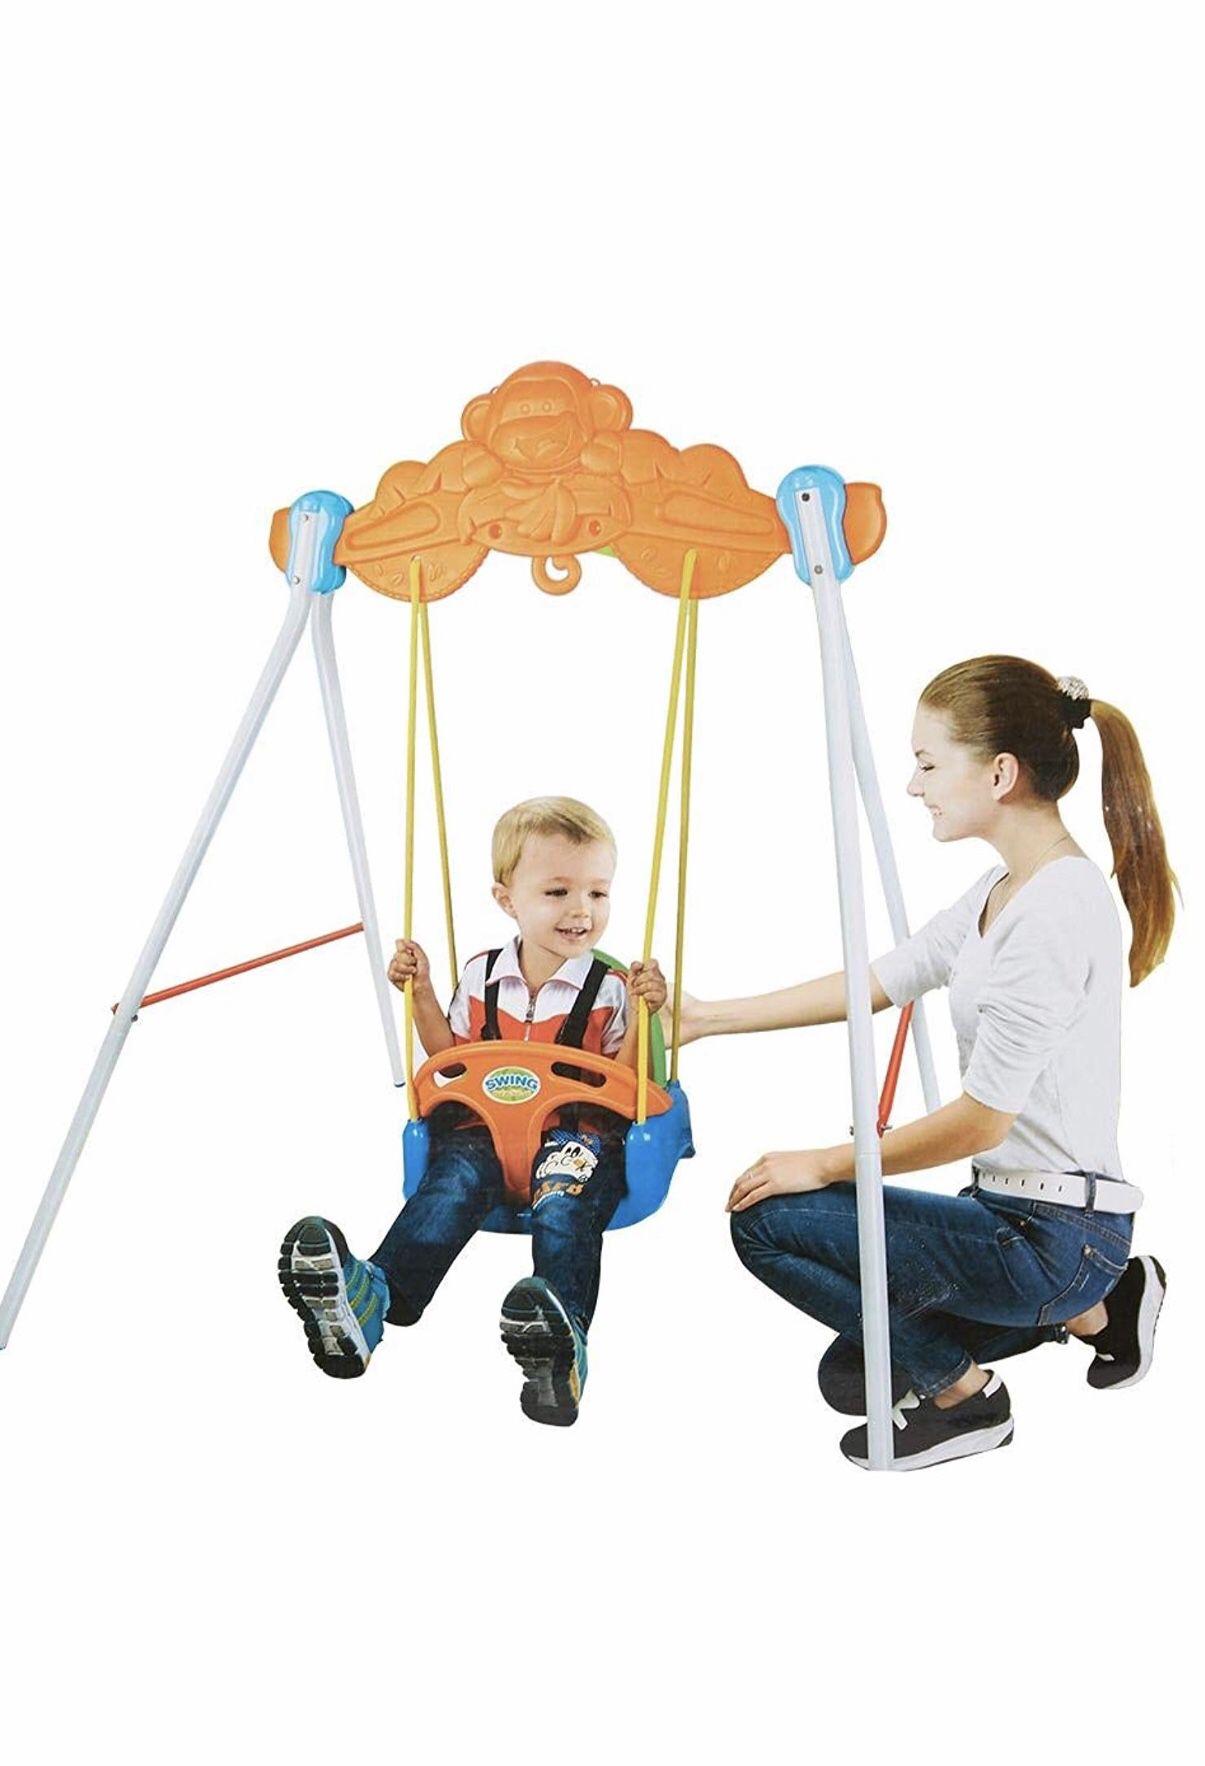 Toy swing safety set for children